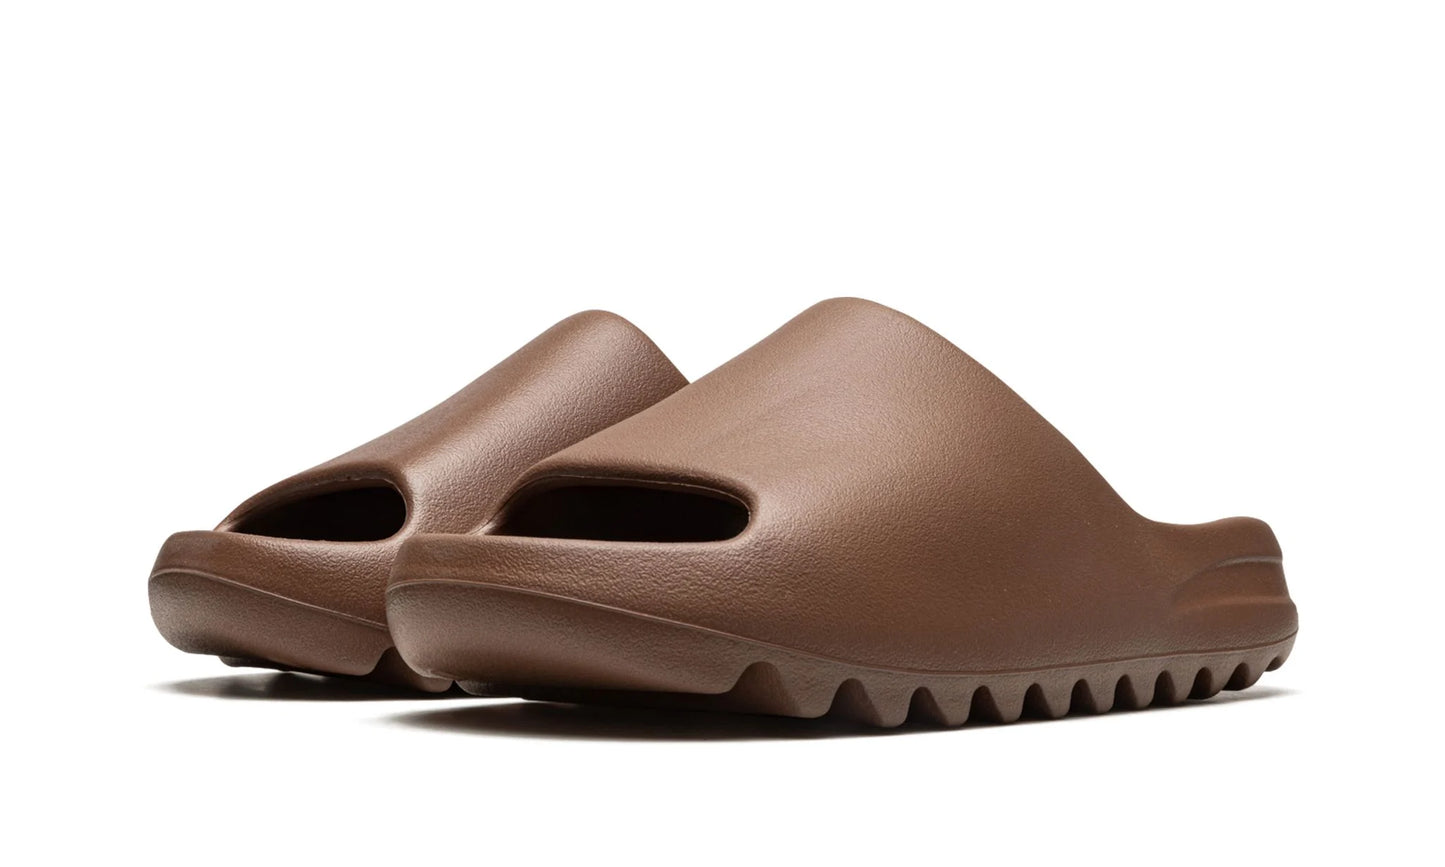 Adidas Yeezy Slide Flax Front View